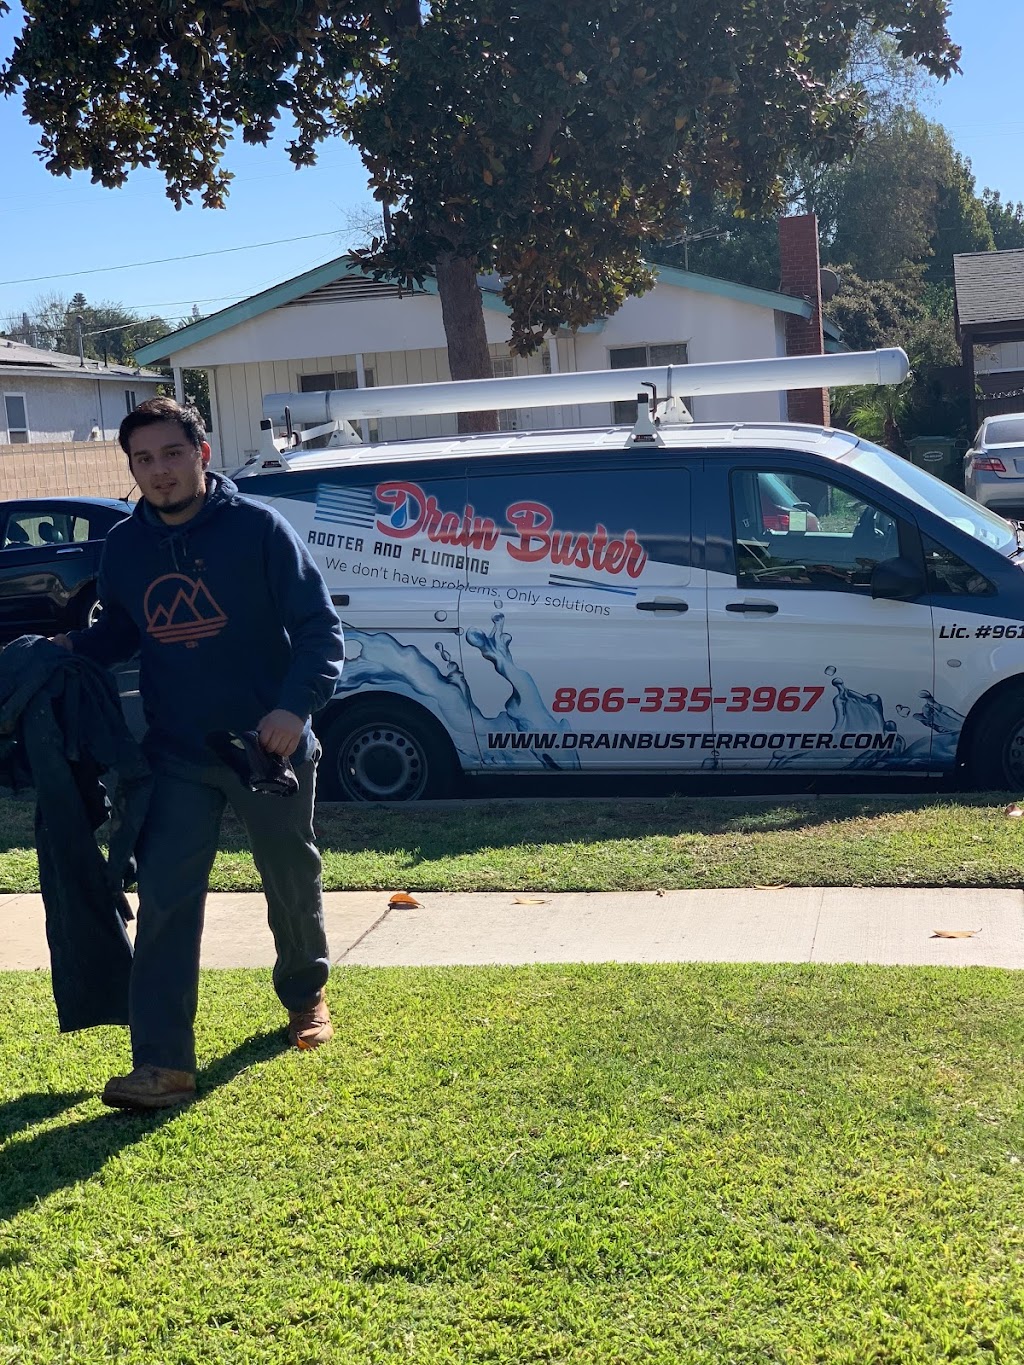 Drain Buster Rooter & Plumbing | 9375 Fern St, South El Monte, CA 91733, USA | Phone: (866) 335-3967